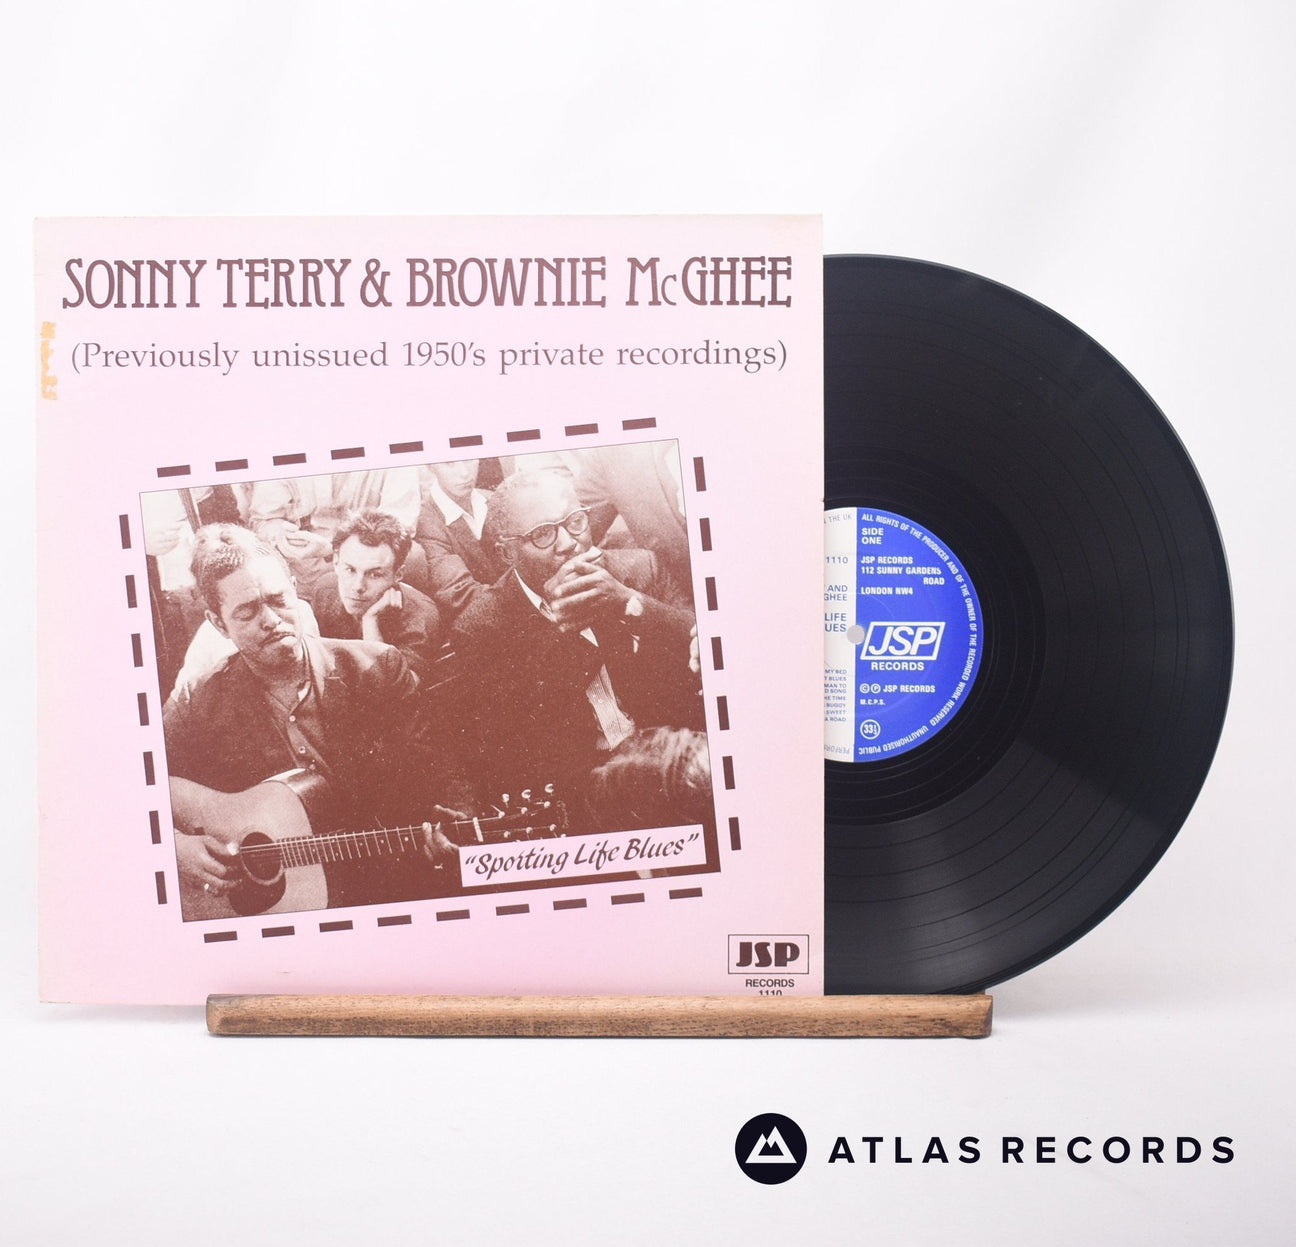 Sonny Terry & Brownie McGhee Sporting Life Blues LP Vinyl Record - Front Cover & Record